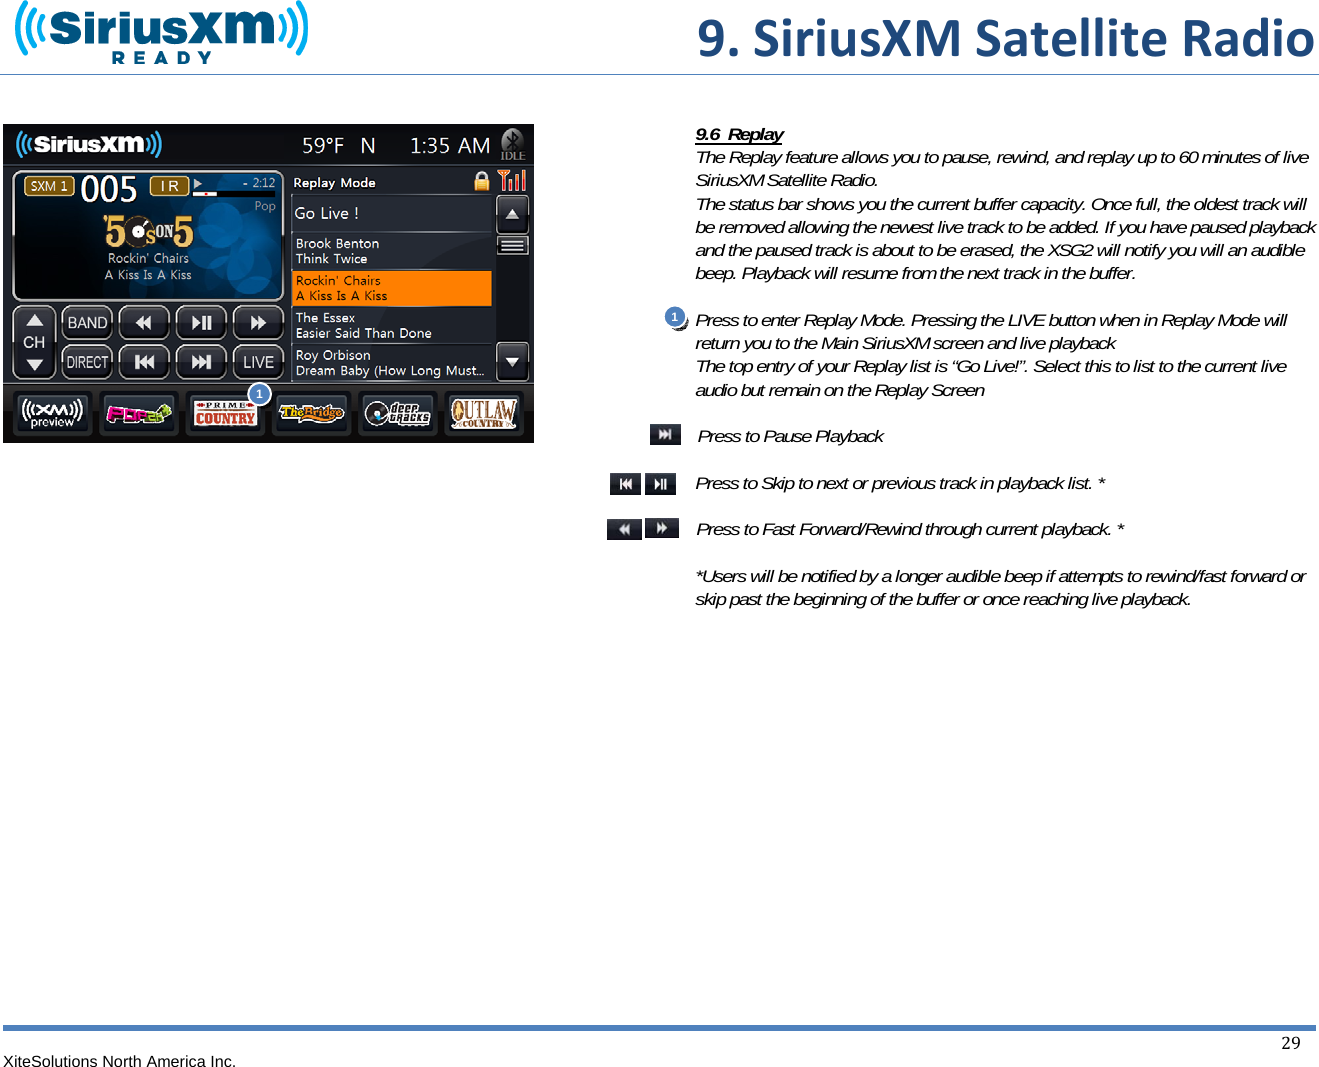  9.SiriusXMSatelliteRadioXiteSolutions North America Inc.  29                                      9.6  Replay The Replay feature allows you to pause, rewind, and replay up to 60 minutes of live SiriusXM Satellite Radio. The status bar shows you the current buffer capacity. Once full, the oldest track will be removed allowing the newest live track to be added. If you have paused playback and the paused track is about to be erased, the XSG2 will notify you will an audible beep. Playback will resume from the next track in the buffer.  Press to enter Replay Mode. Pressing the LIVE button when in Replay Mode will return you to the Main SiriusXM screen and live playback The top entry of your Replay list is “Go Live!”. Select this to list to the current live audio but remain on the Replay Screen  Press to Pause Playback  Press to Skip to next or previous track in playback list. *  Press to Fast Forward/Rewind through current playback. *  *Users will be notified by a longer audible beep if attempts to rewind/fast forward or skip past the beginning of the buffer or once reaching live playback.             1 1